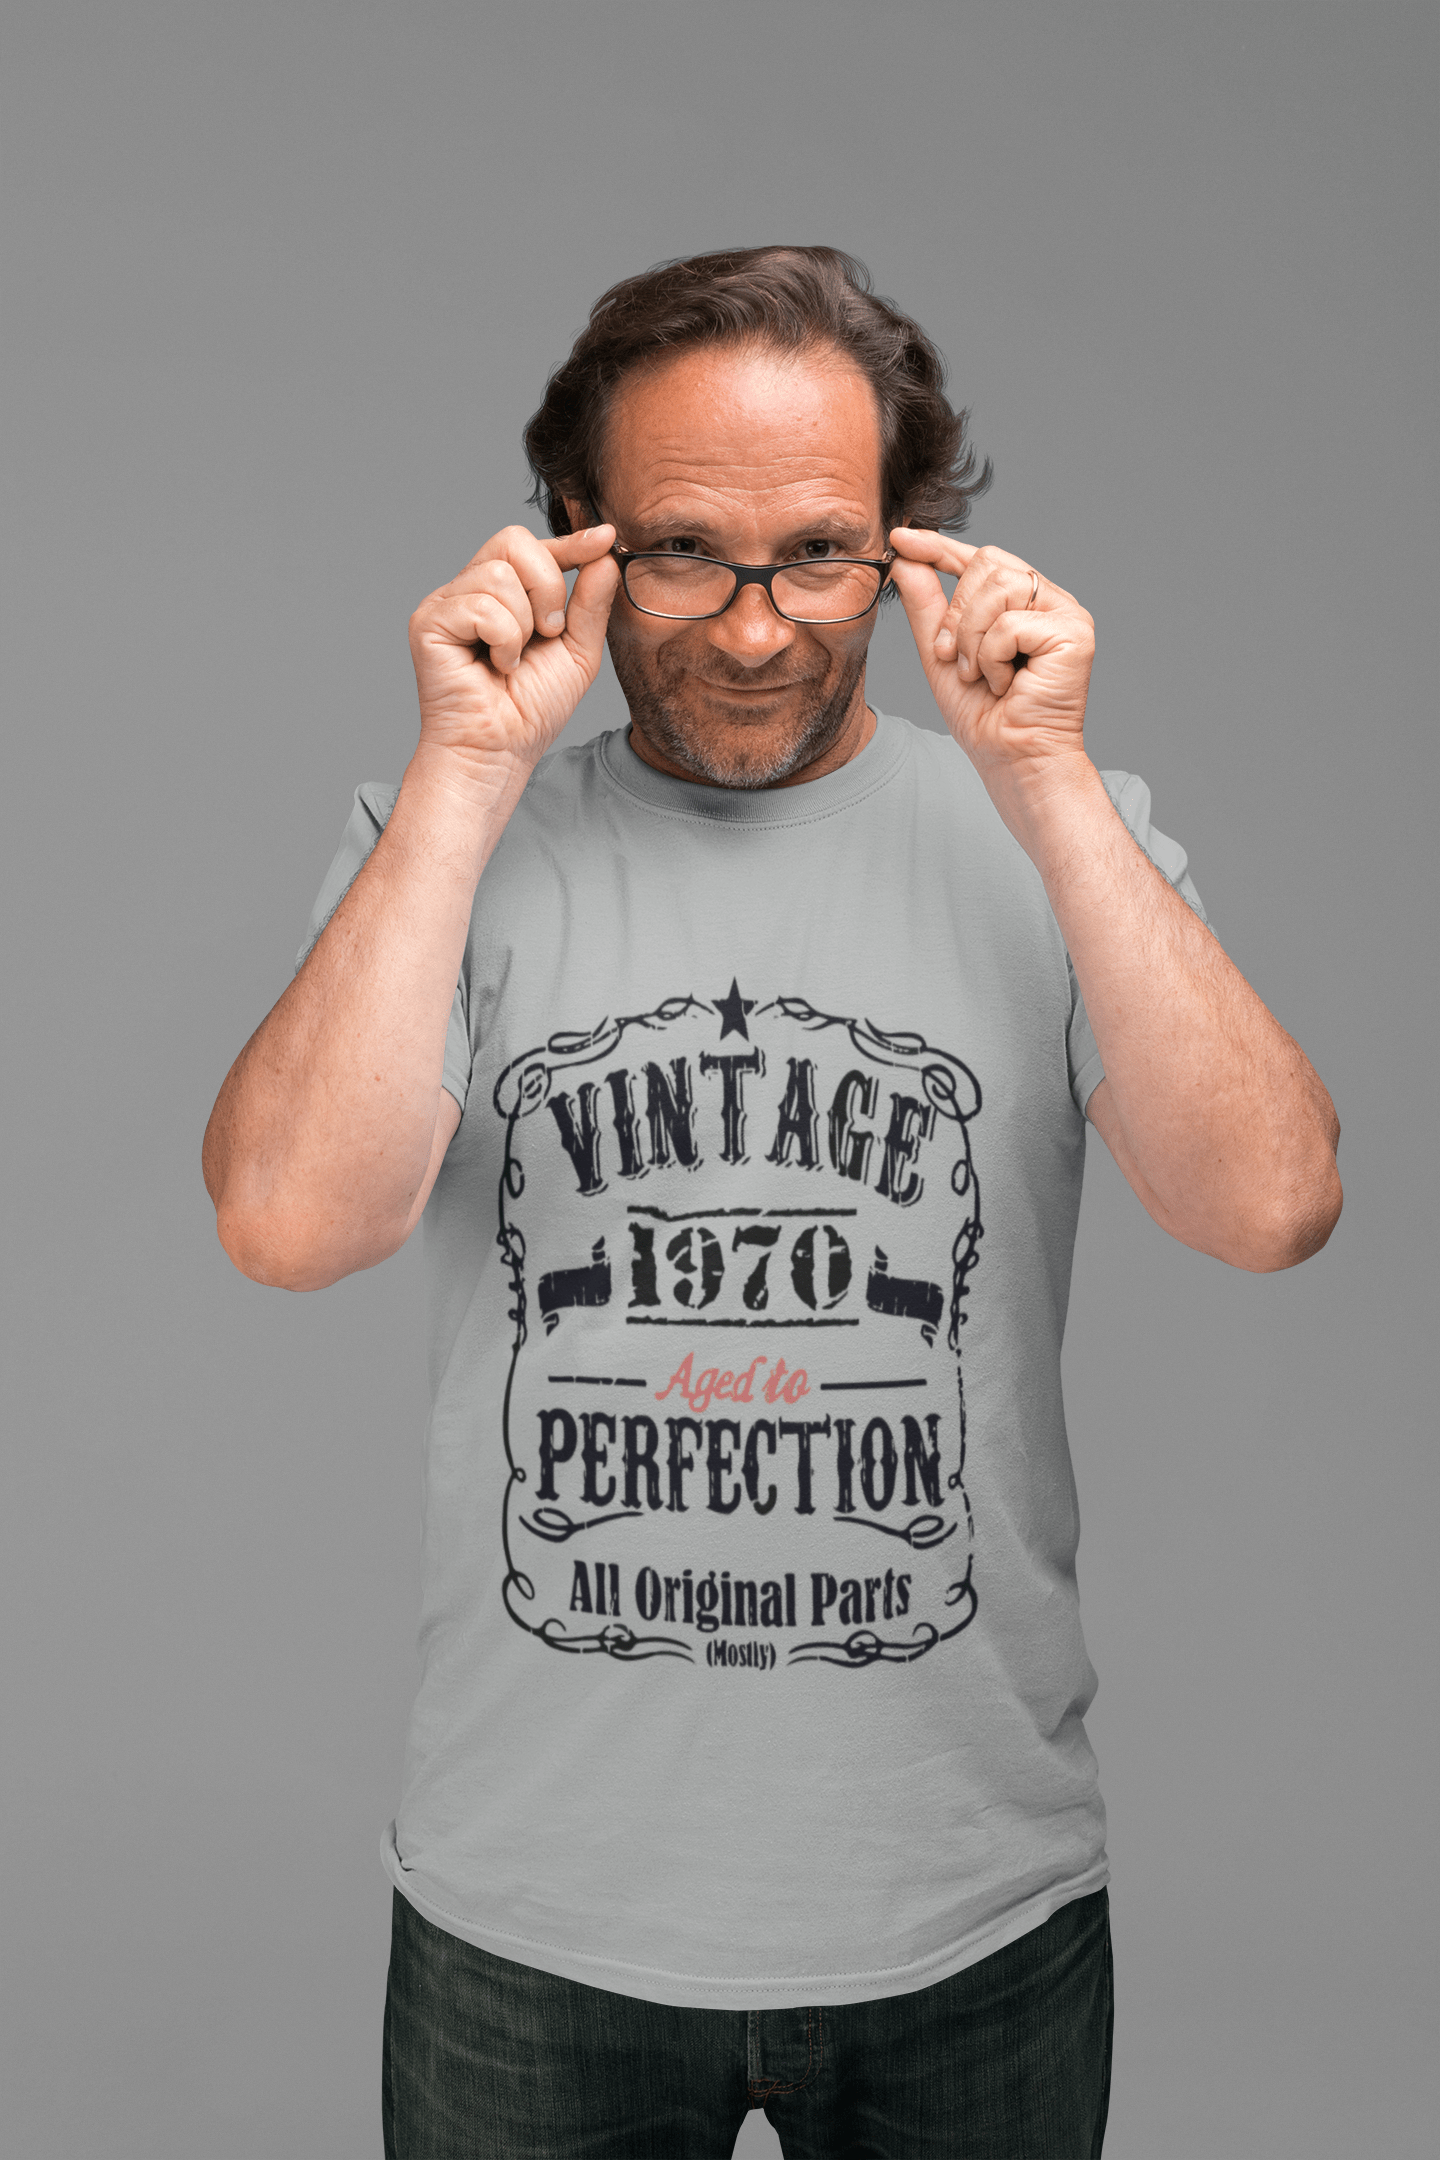 1970 Vintage Aged to Perfection Men's T-shirt Grey Birthday Gift 00489